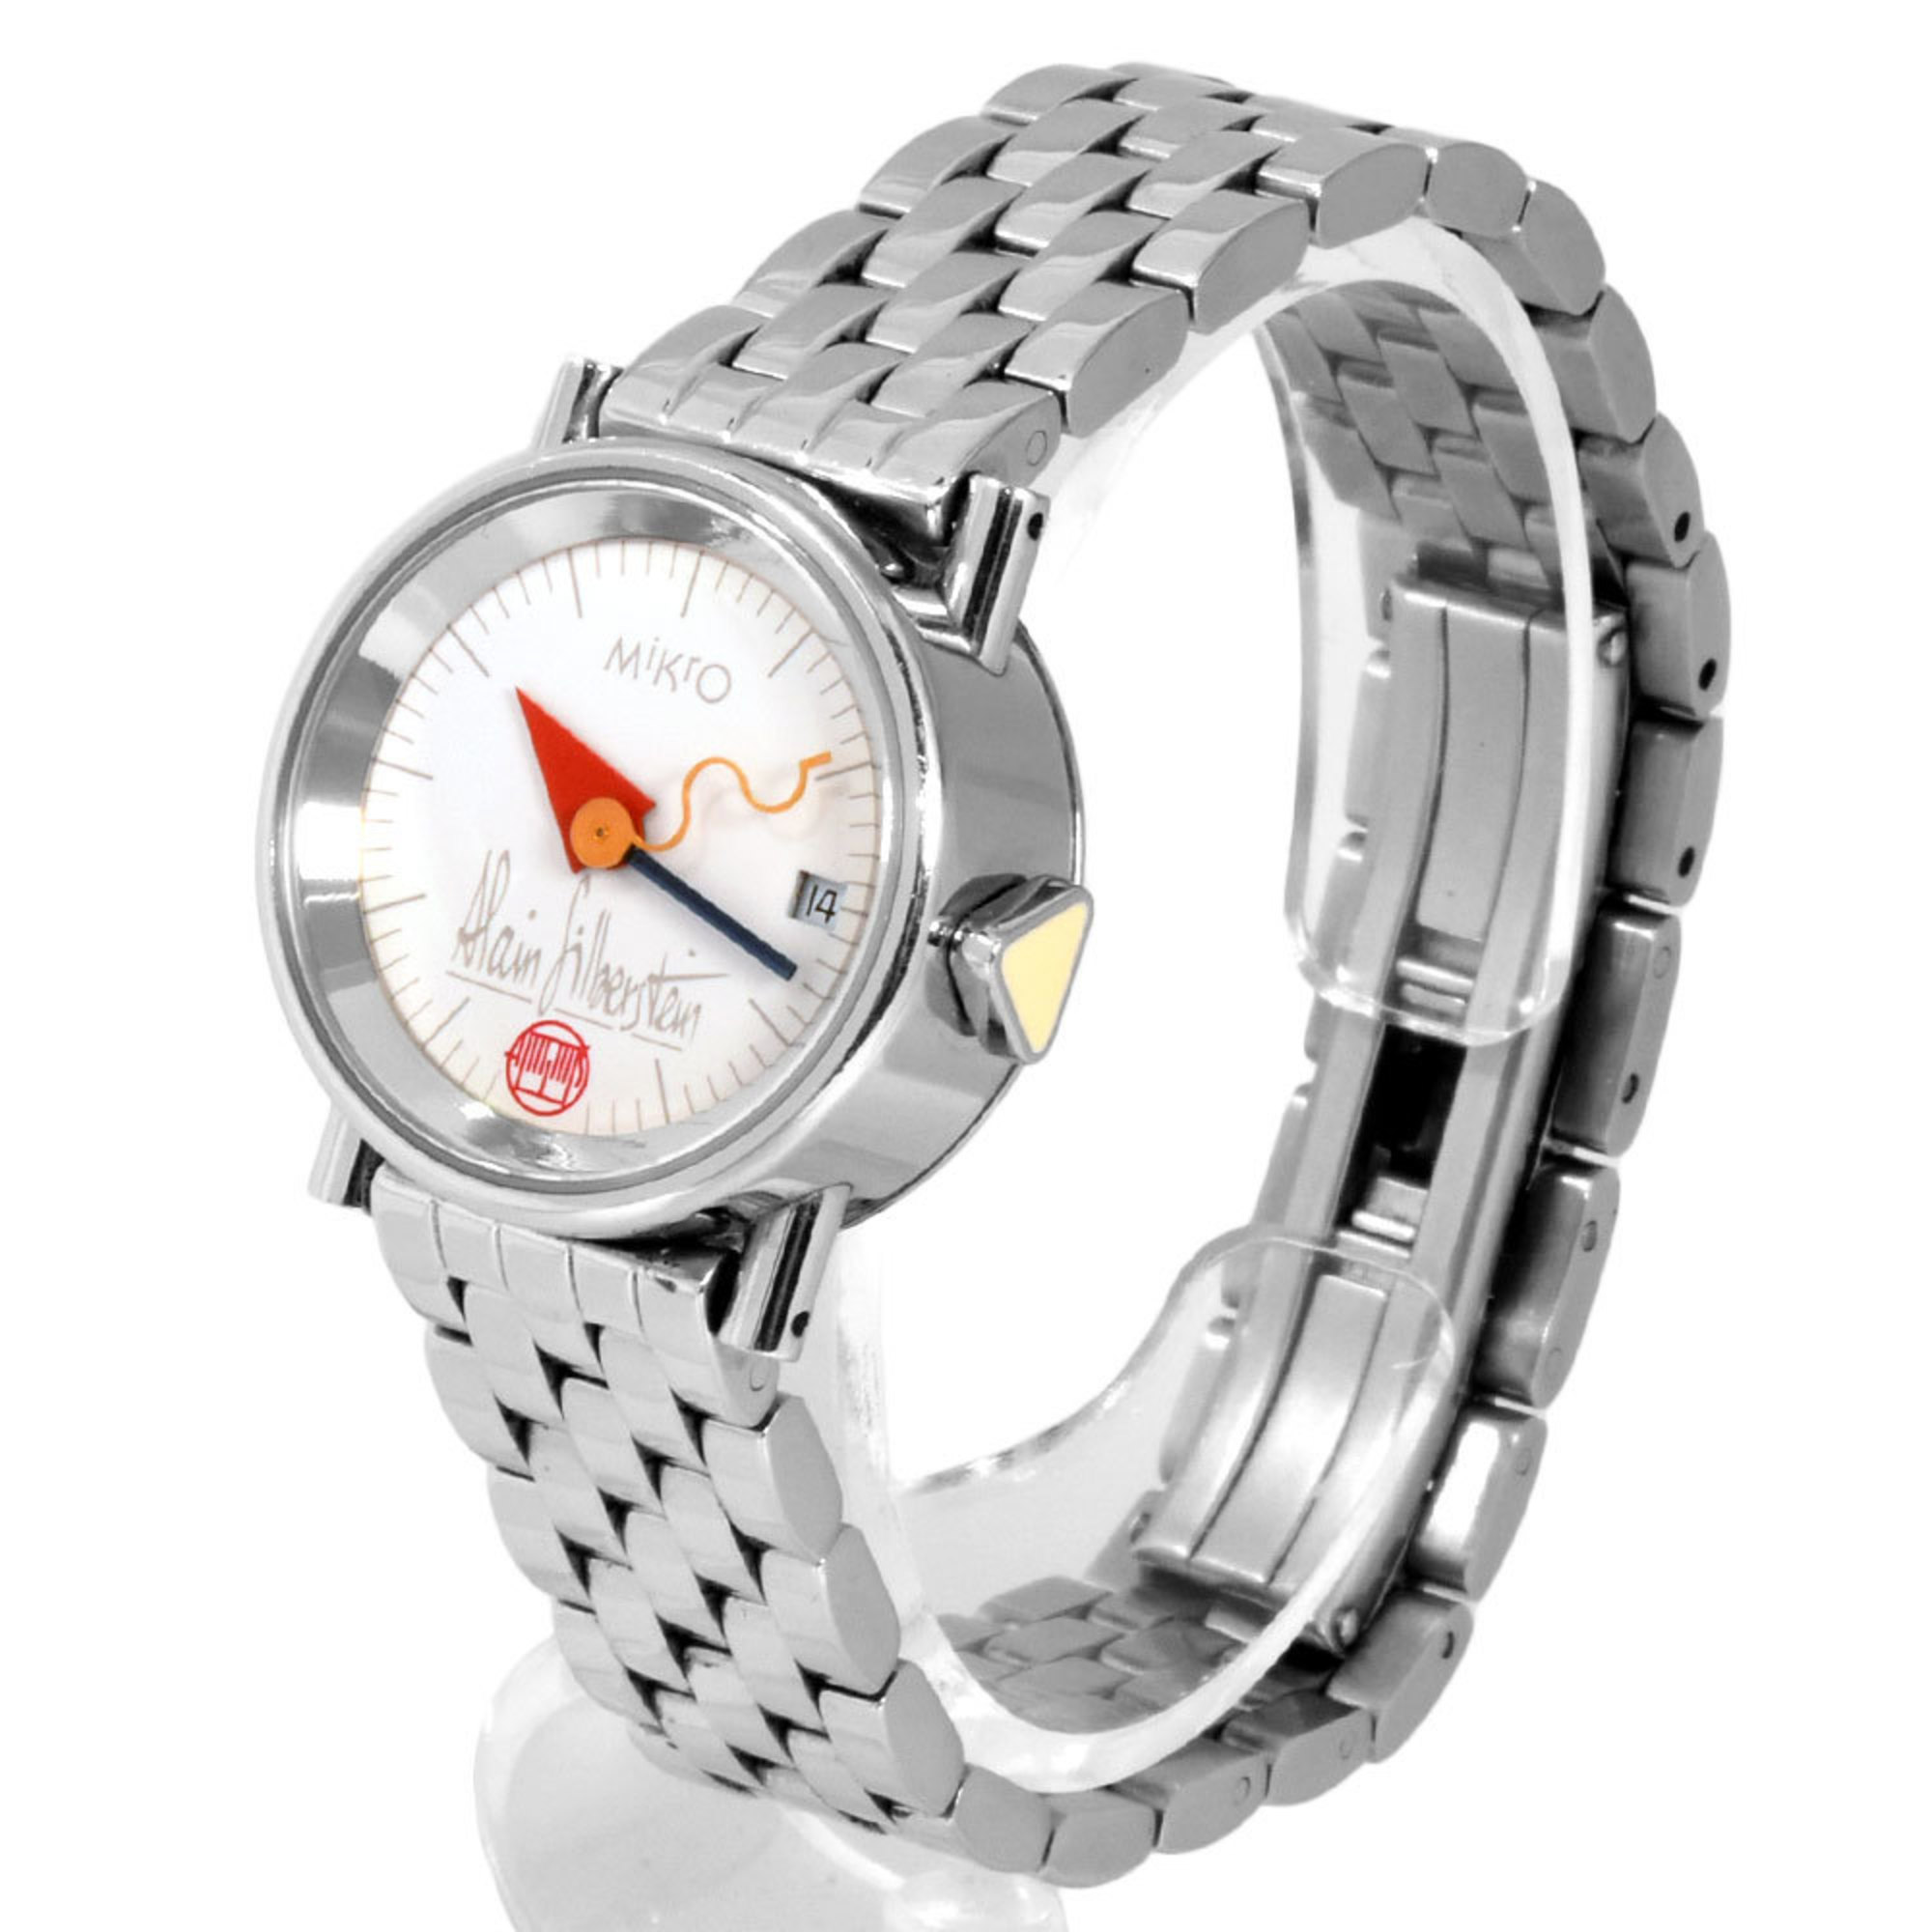 Alain Silberstein MIKRO Automatic Watch, White Dial, Women's, Limited Edition 999 ITBHDHWAKXM8